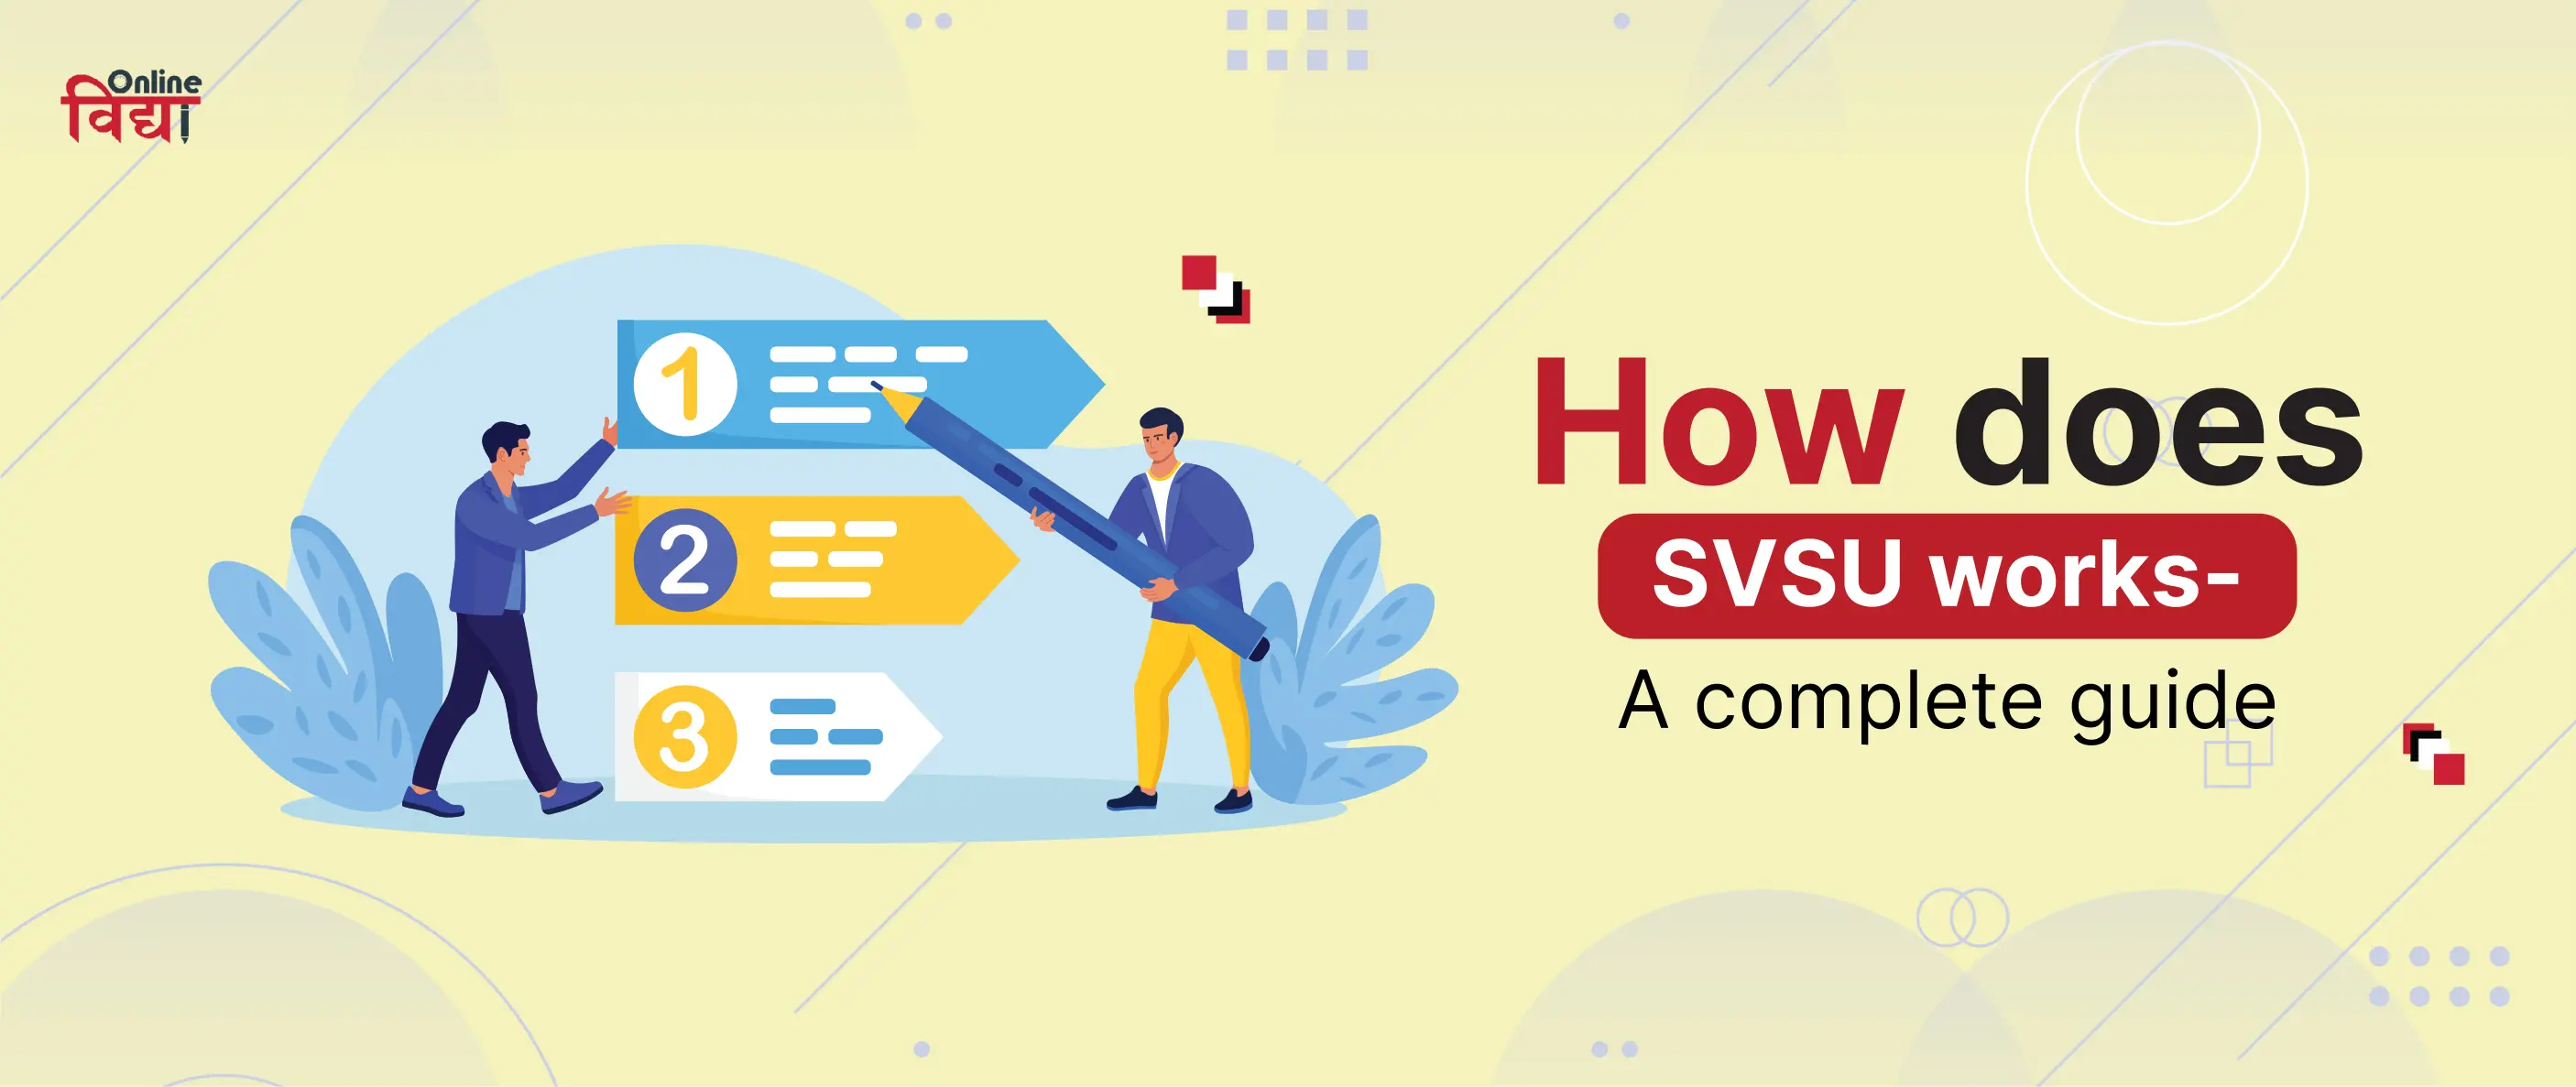 How does SVSU work -A complete guide